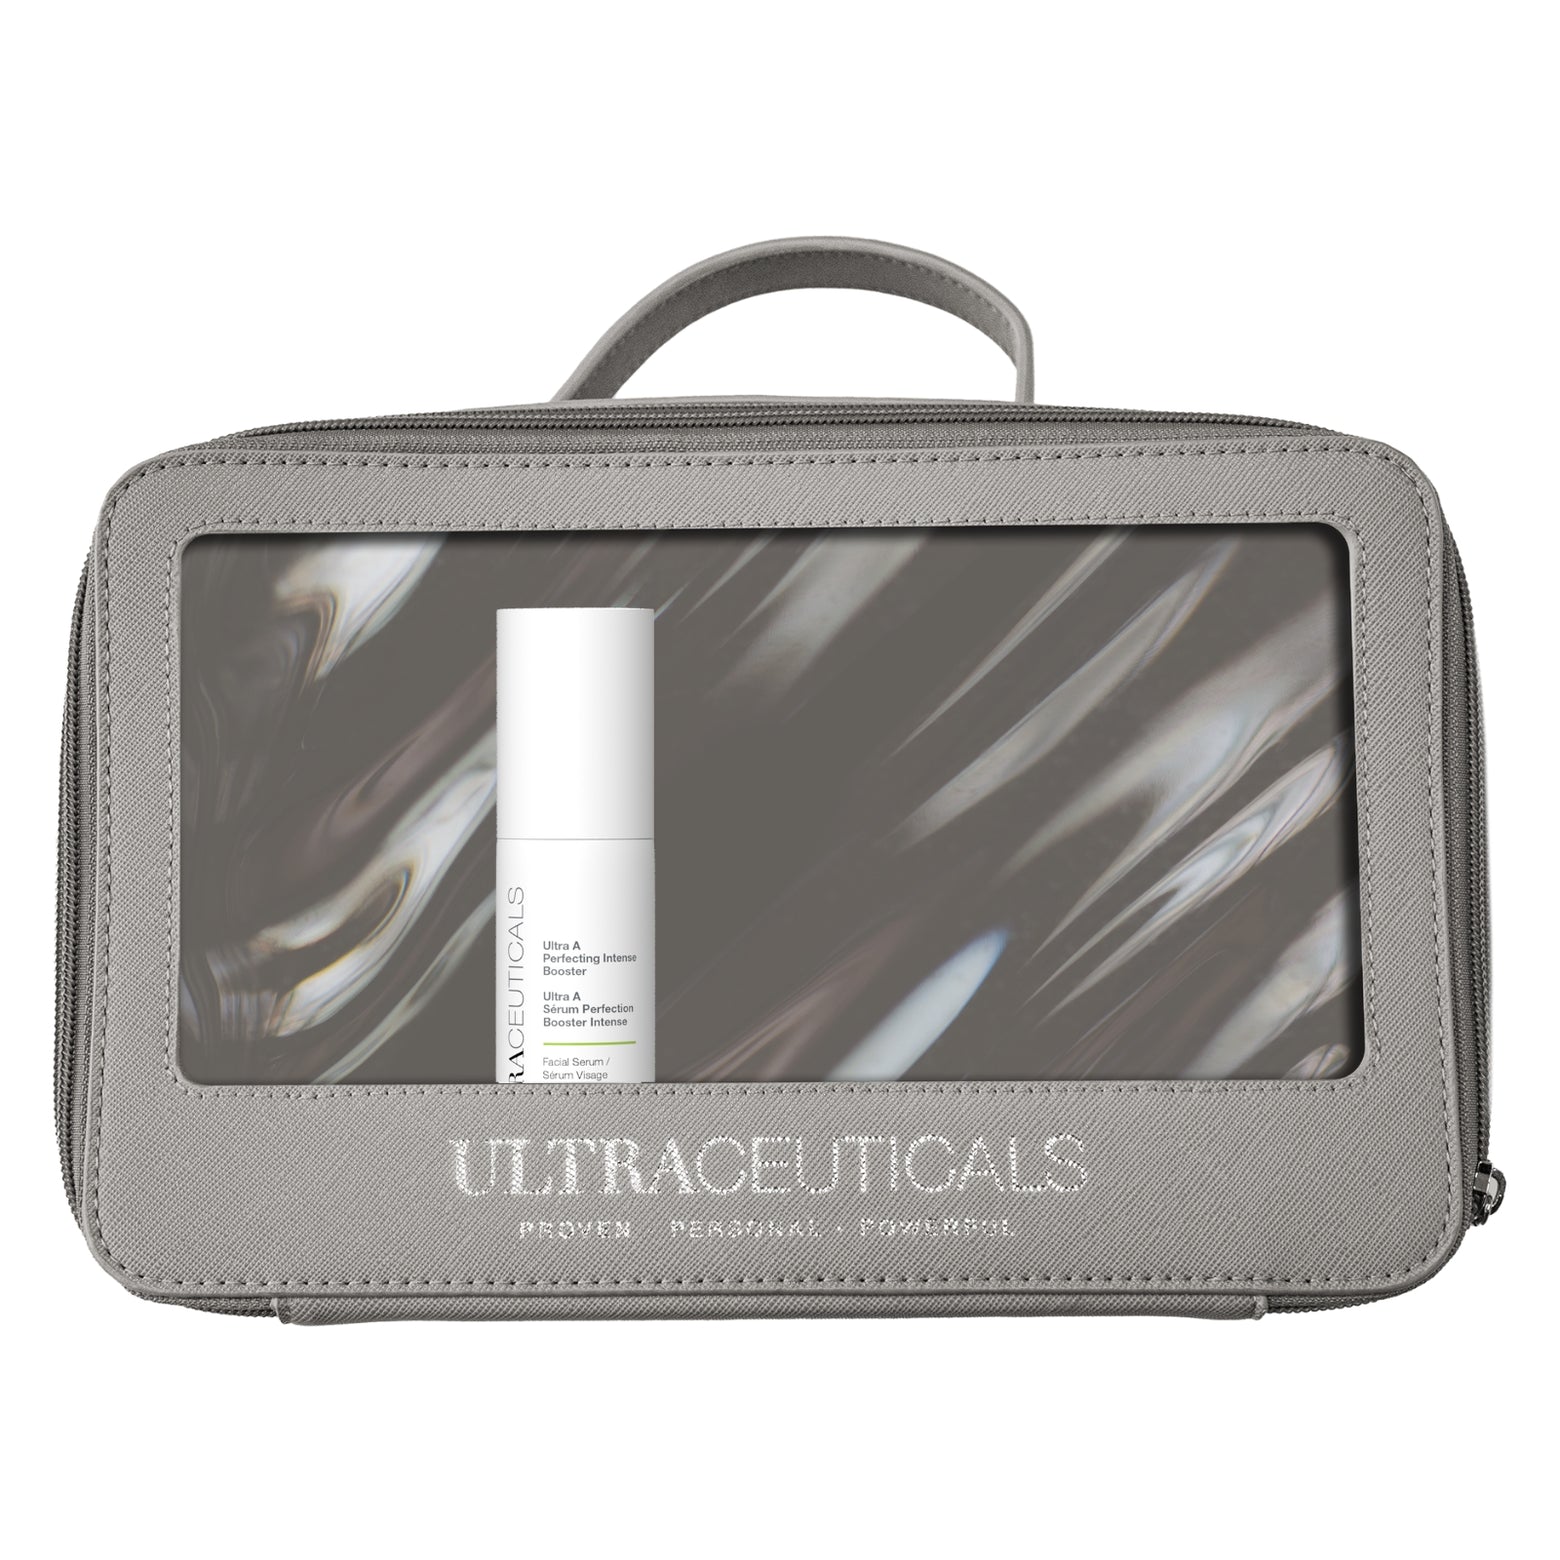 Ultra A Perfecting Intense Booster + Beauty Bag